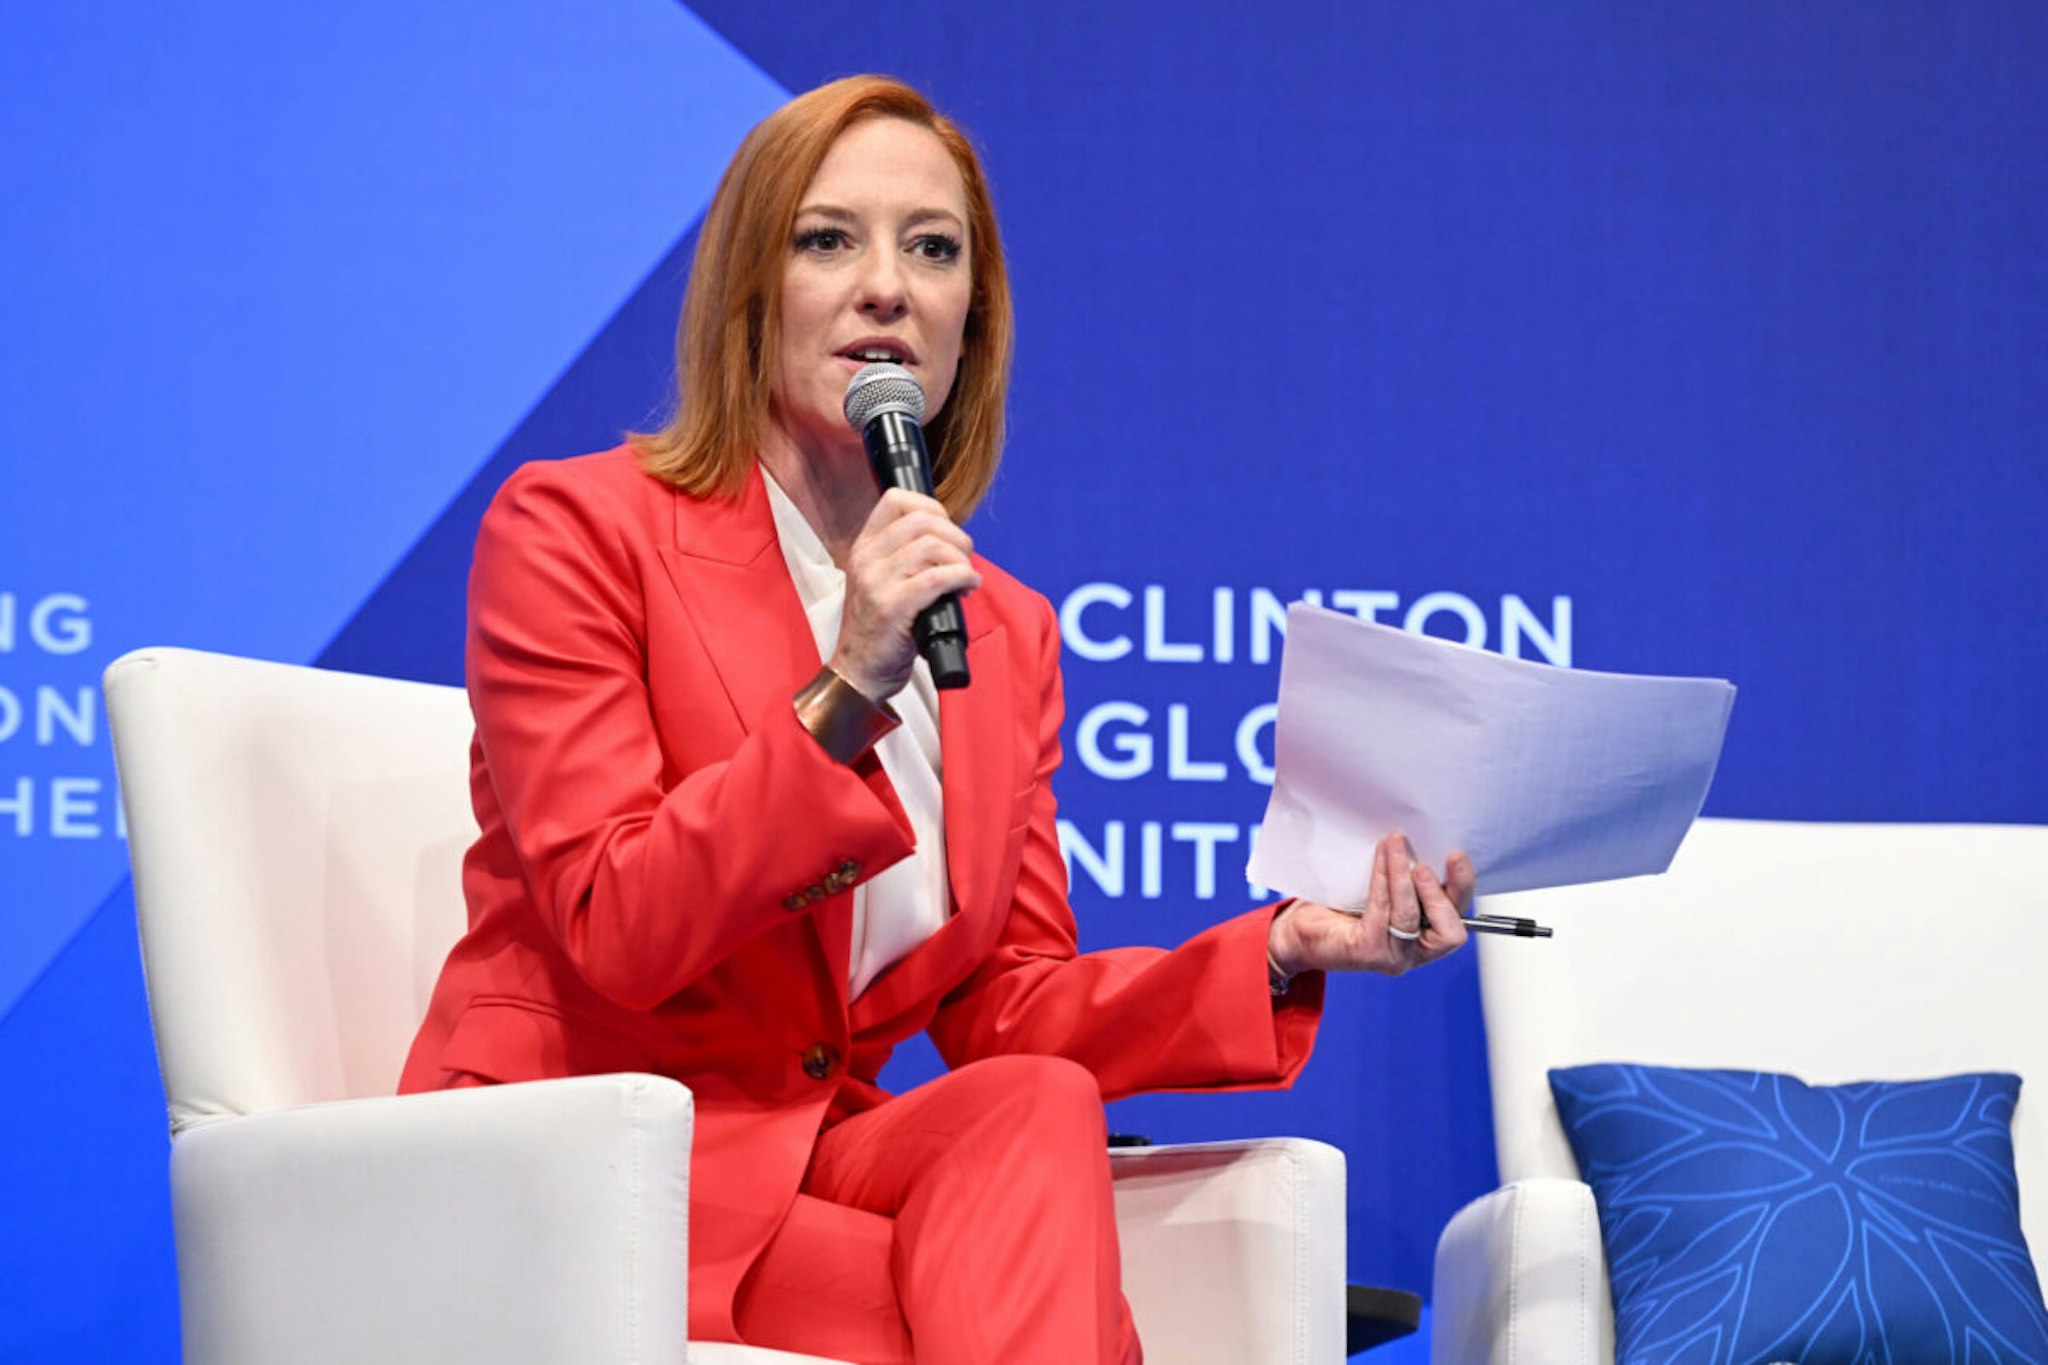 Jen Psaki participates in the session "Women’s Rights are Human Rights: How to Provide Abortion Care in a Post-Dobbs World" during the Clinton Global Initiative September 2023 Meeting at New York Hilton Midtown on September 19, 2023 in New York City.